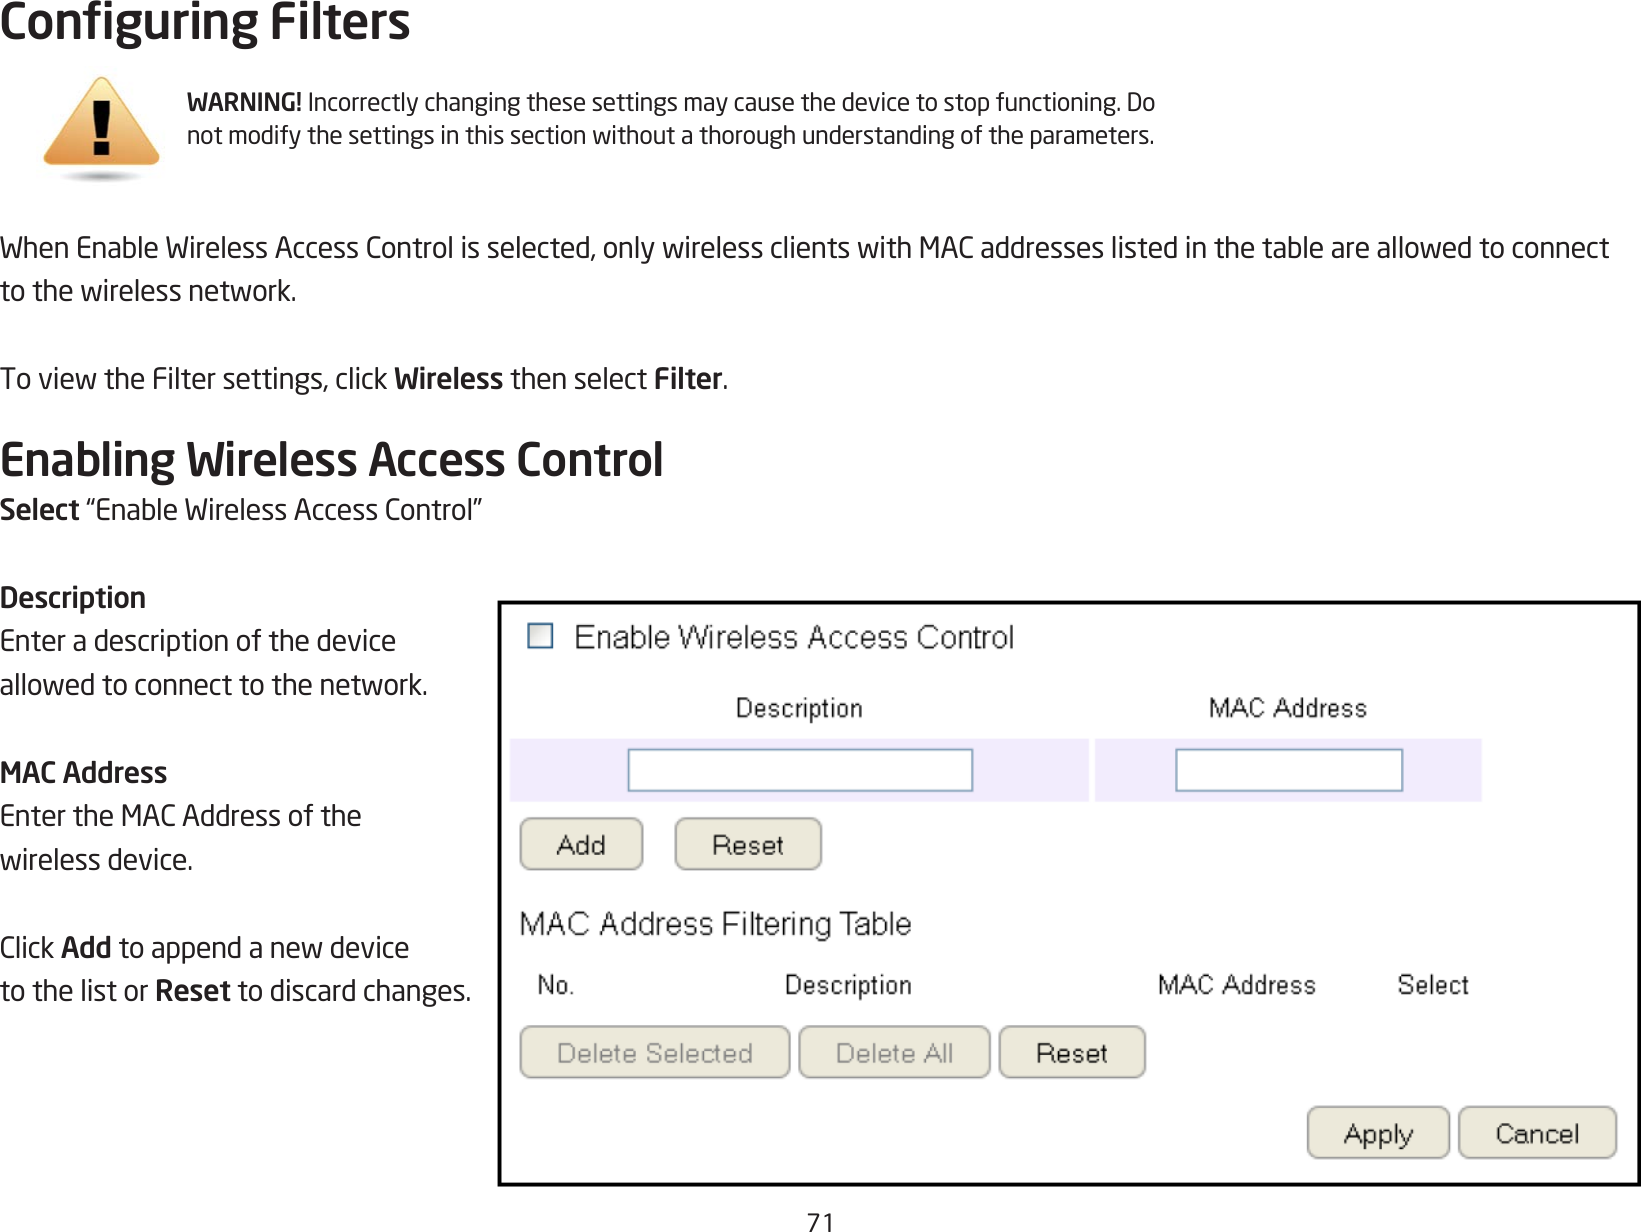 71Conguring FiltersWhenEnableWirelessAccessControlisselected,onlywirelessclientswithMACaddresseslistedinthetableareallowedtoconnecttothewirelessnetwork.ToviewtheFiltersettings,clickWireless then select Filter.Enabling Wireless Access ControlSelect“EnableWirelessAccessControl”DescriptionEnter a description of the device allowedtoconnecttothenetwork.MAC AddressEntertheMACAddressofthewirelessdevice.ClickAdd toappendanewdeviceto the list or Reset to discard changes.WARNING! Incorrectlychangingthesesettingsmaycausethedevicetostopfunctioning.Donotmodifythesettingsinthissectionwithoutathoroughunderstandingoftheparameters.